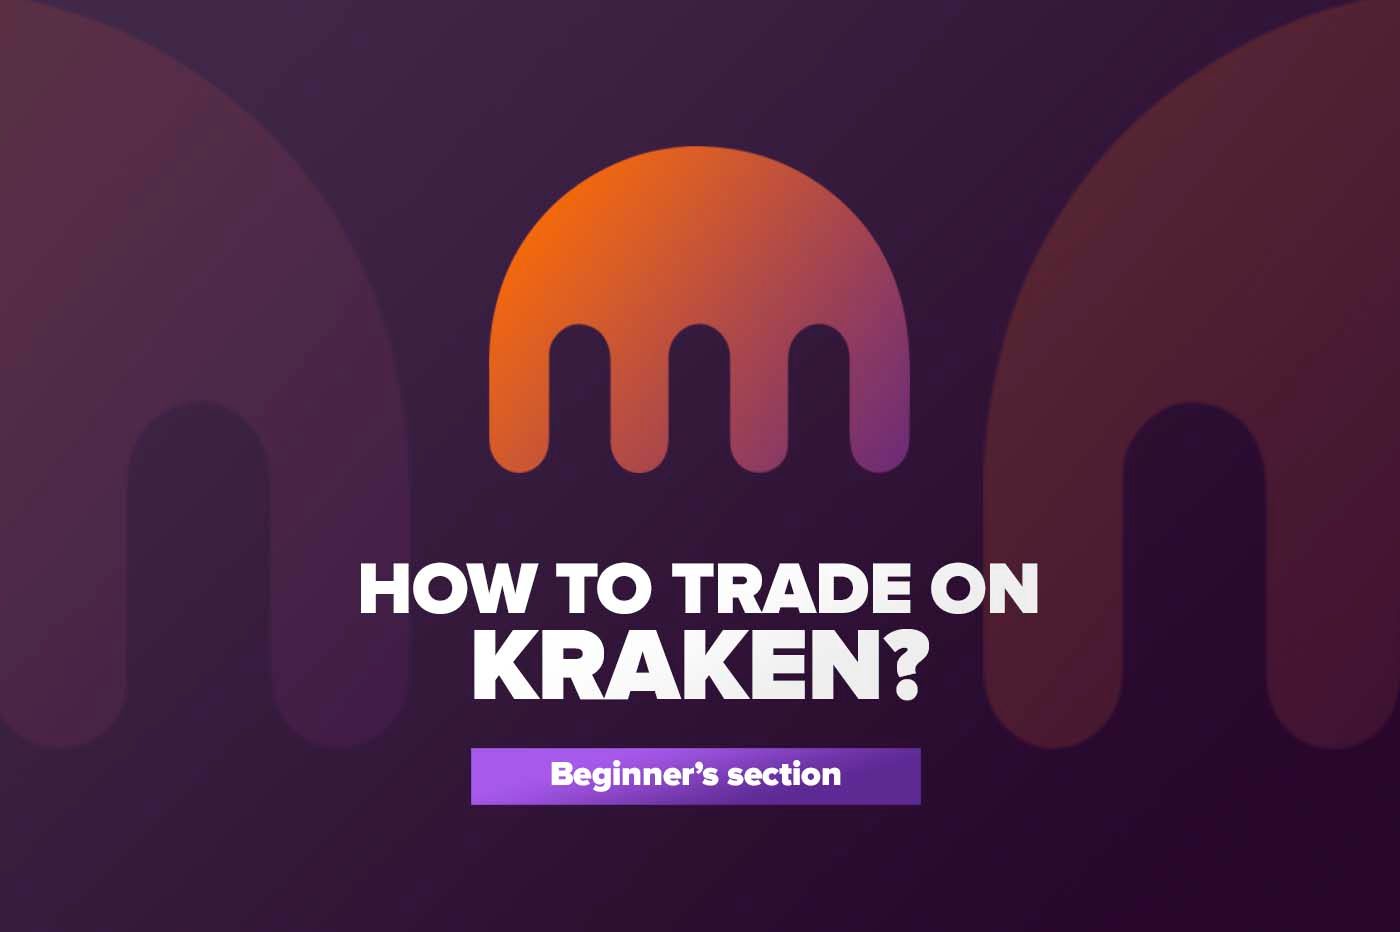 Article How to trade on Kraken?